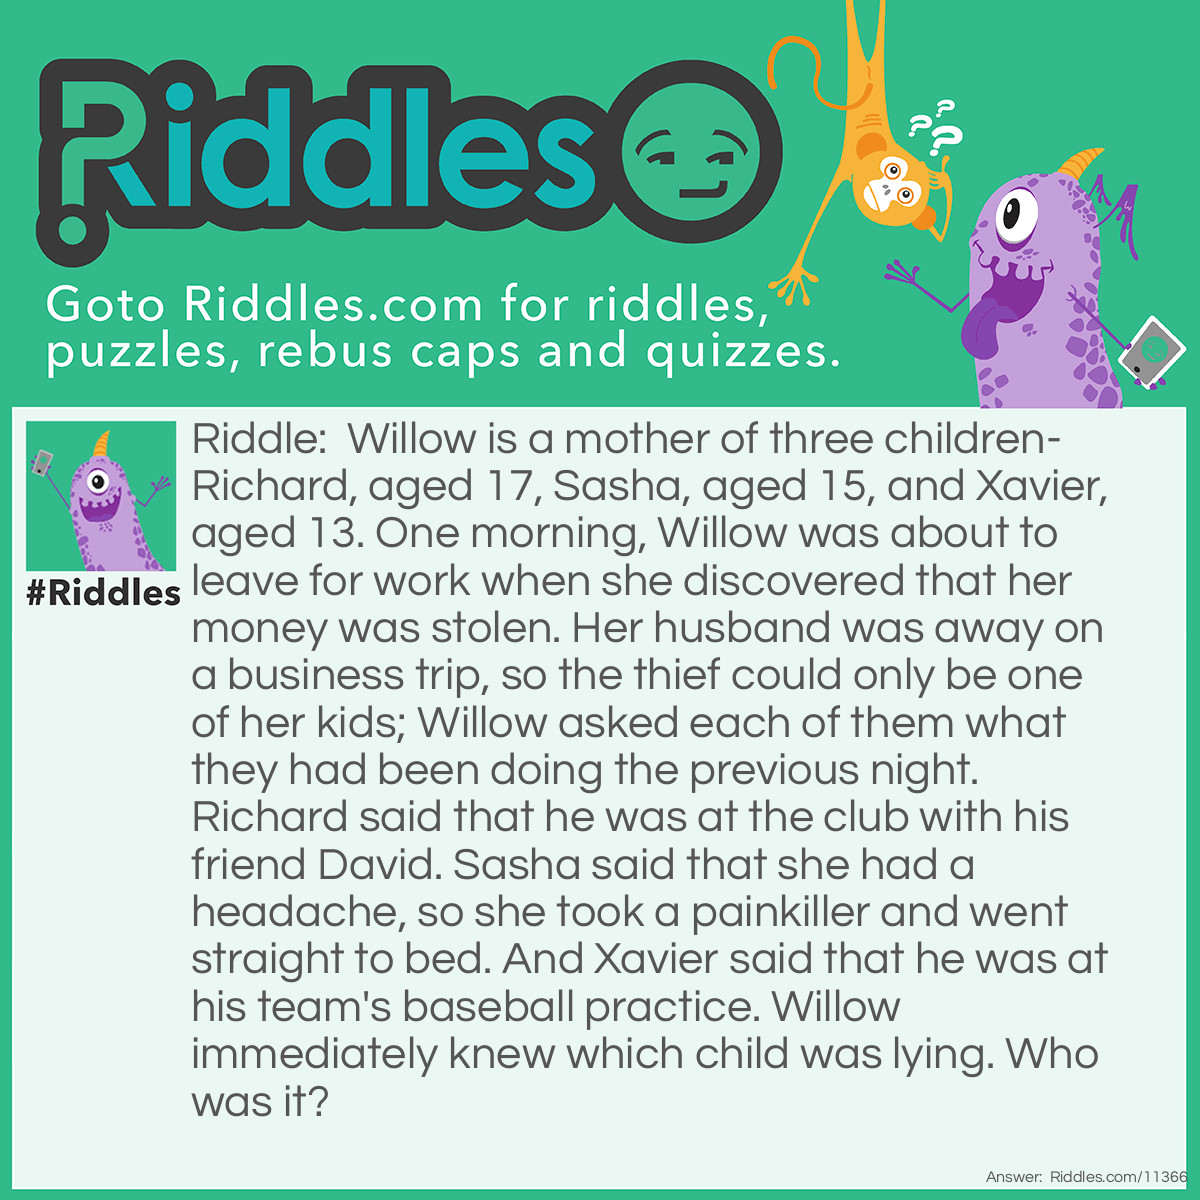 Riddle: Willow is a mother of three children-Richard, aged 17, Sasha, aged 15, and Xavier, aged 13. One morning, Willow was about to leave for work when she discovered that her money was stolen. Her husband was away on a business trip, so the thief could only be one of her kids; Willow asked each of them what they had been doing the previous night. Richard said that he was at the club with his friend David. Sasha said that she had a headache, so she took a painkiller and went straight to bed. And Xavier said that he was at his team's baseball practice. Willow immediately knew which child was lying. Who was it? Answer: Richard is lying. He couldn't be at the club because he's only 17. And before you say, "He could've been at an after-school club", just note that "the club" usually refers to a nightclub; only folks who are 21 or older can get inside. Because Richard is not old enough to get into the club, he couldn't be in there with his friend. Therefore, he must have taken Willow's money.